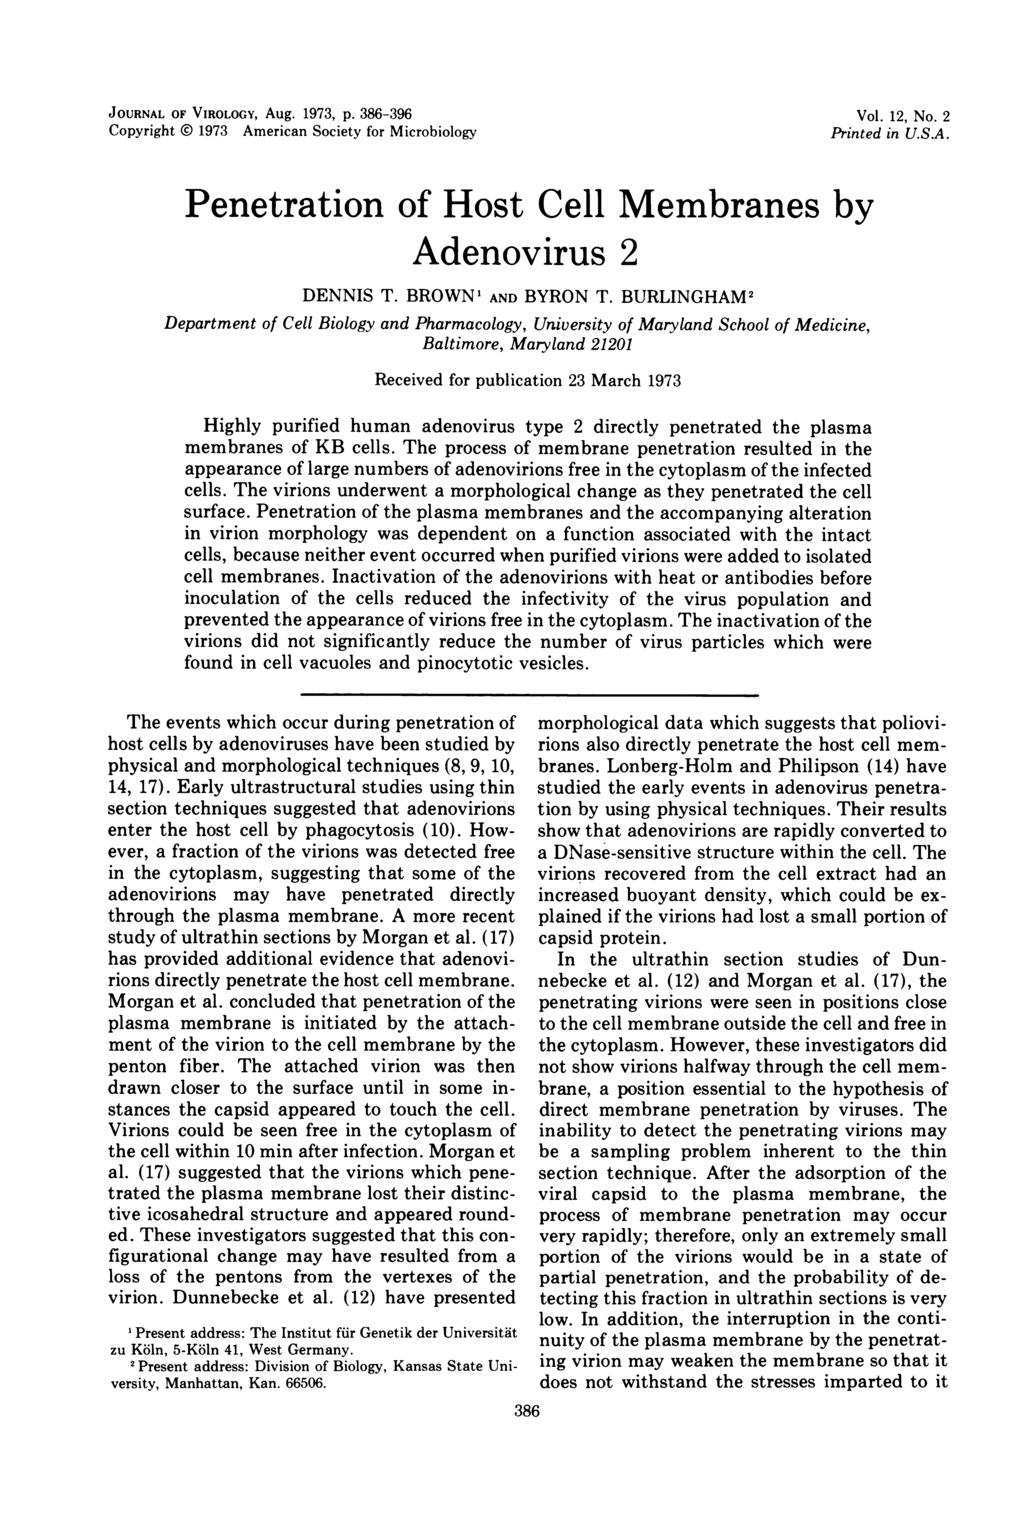 JOURNAL OF VIROLOGY, Aug. 1973, p. 386-396 Copyright 1973 American Society for Microbiology Vol. 12, No. 2 Printed in U.S.A. Penetration of Host Cell Membranes by Adenovirus 2 DENNIS T.